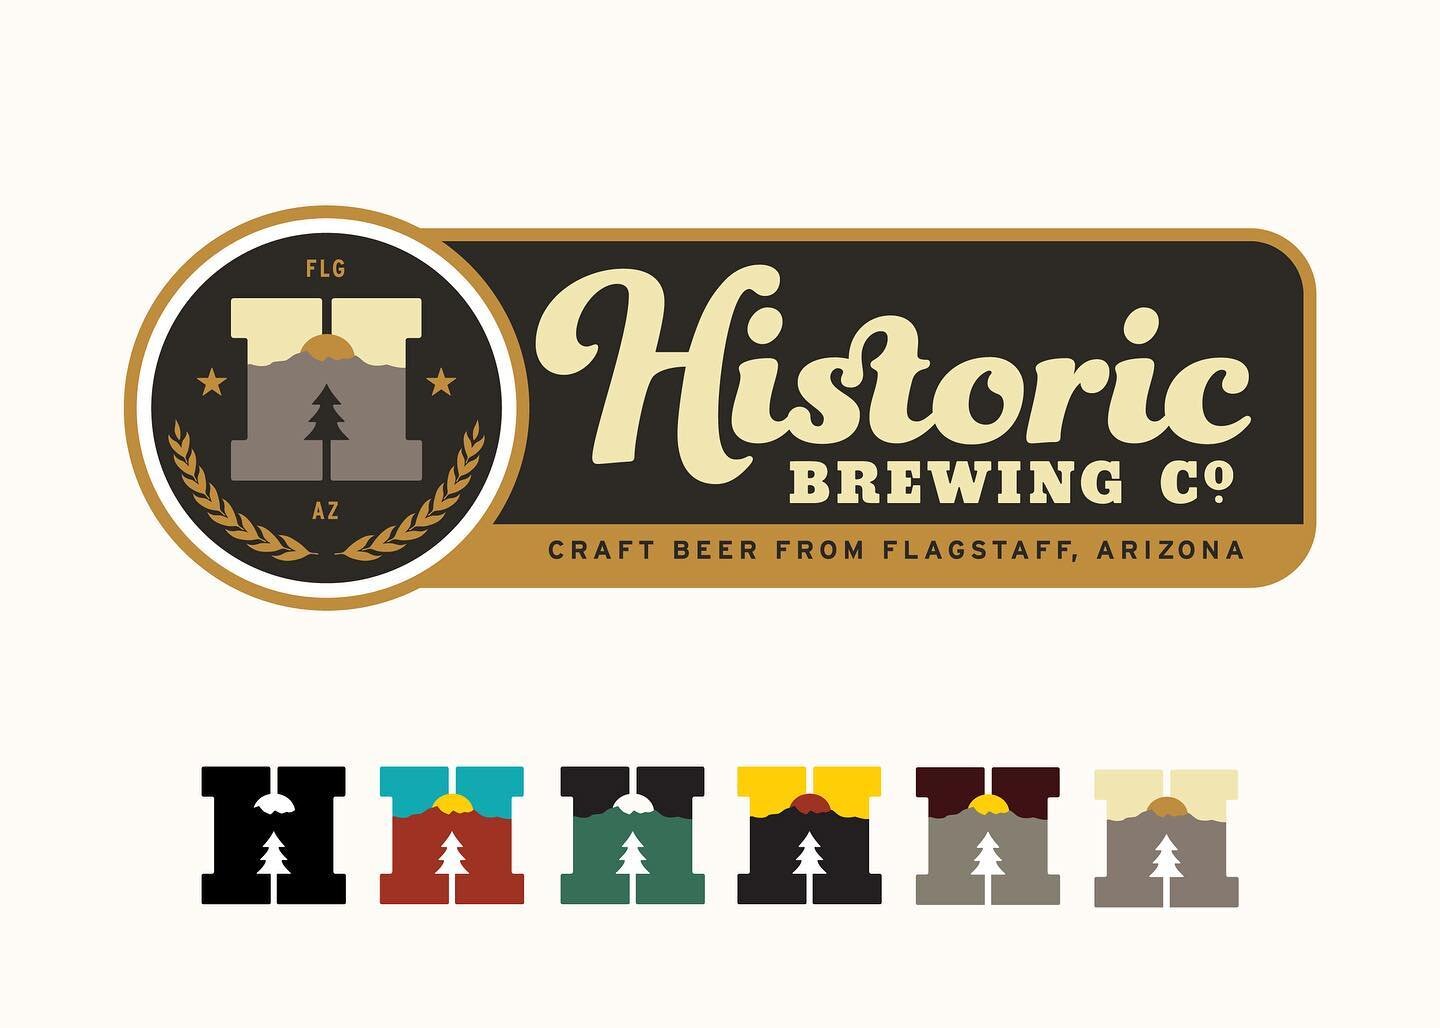 Last year we redesigned the brand identity system for my friends at @historicbrewingcompany up in Flagstaff and Williams, AZ. We kept the vintage Route66/railroad-inspired vibe (hello, &ldquo;historic&rdquo;) but brought some extra substance to the w